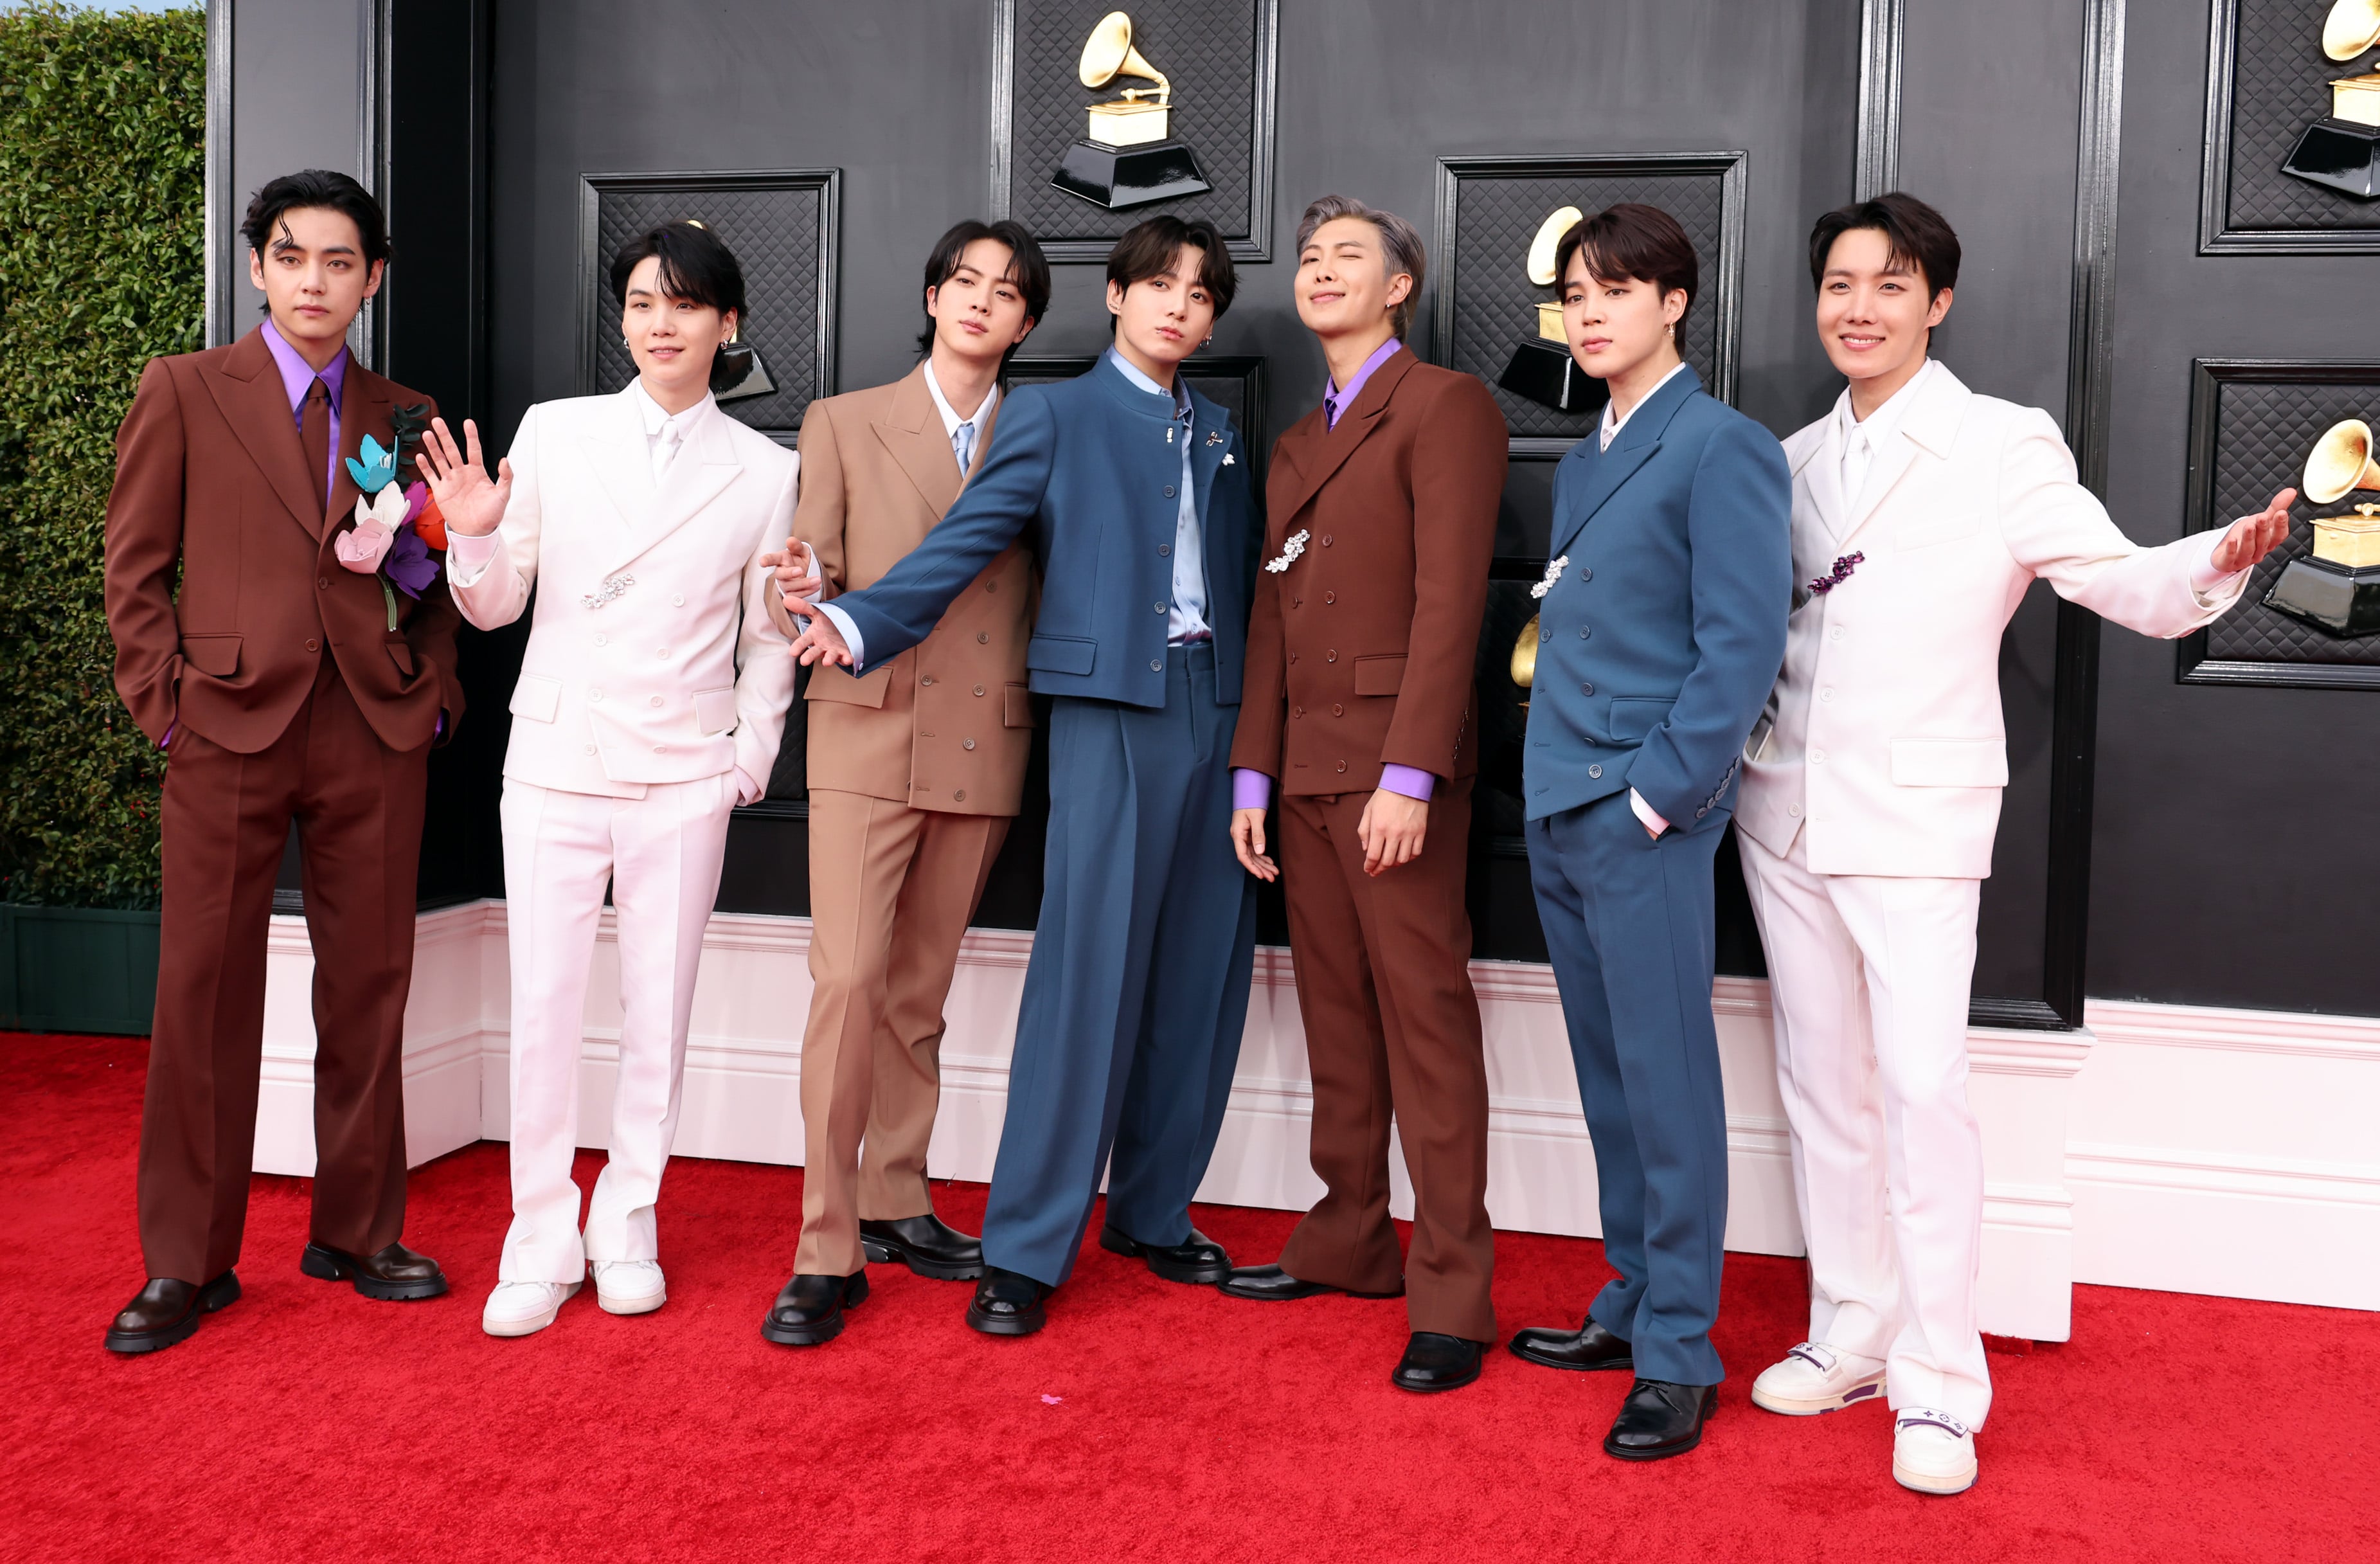 Will BTS Go To The 2020 Grammys? Here Are The Chances